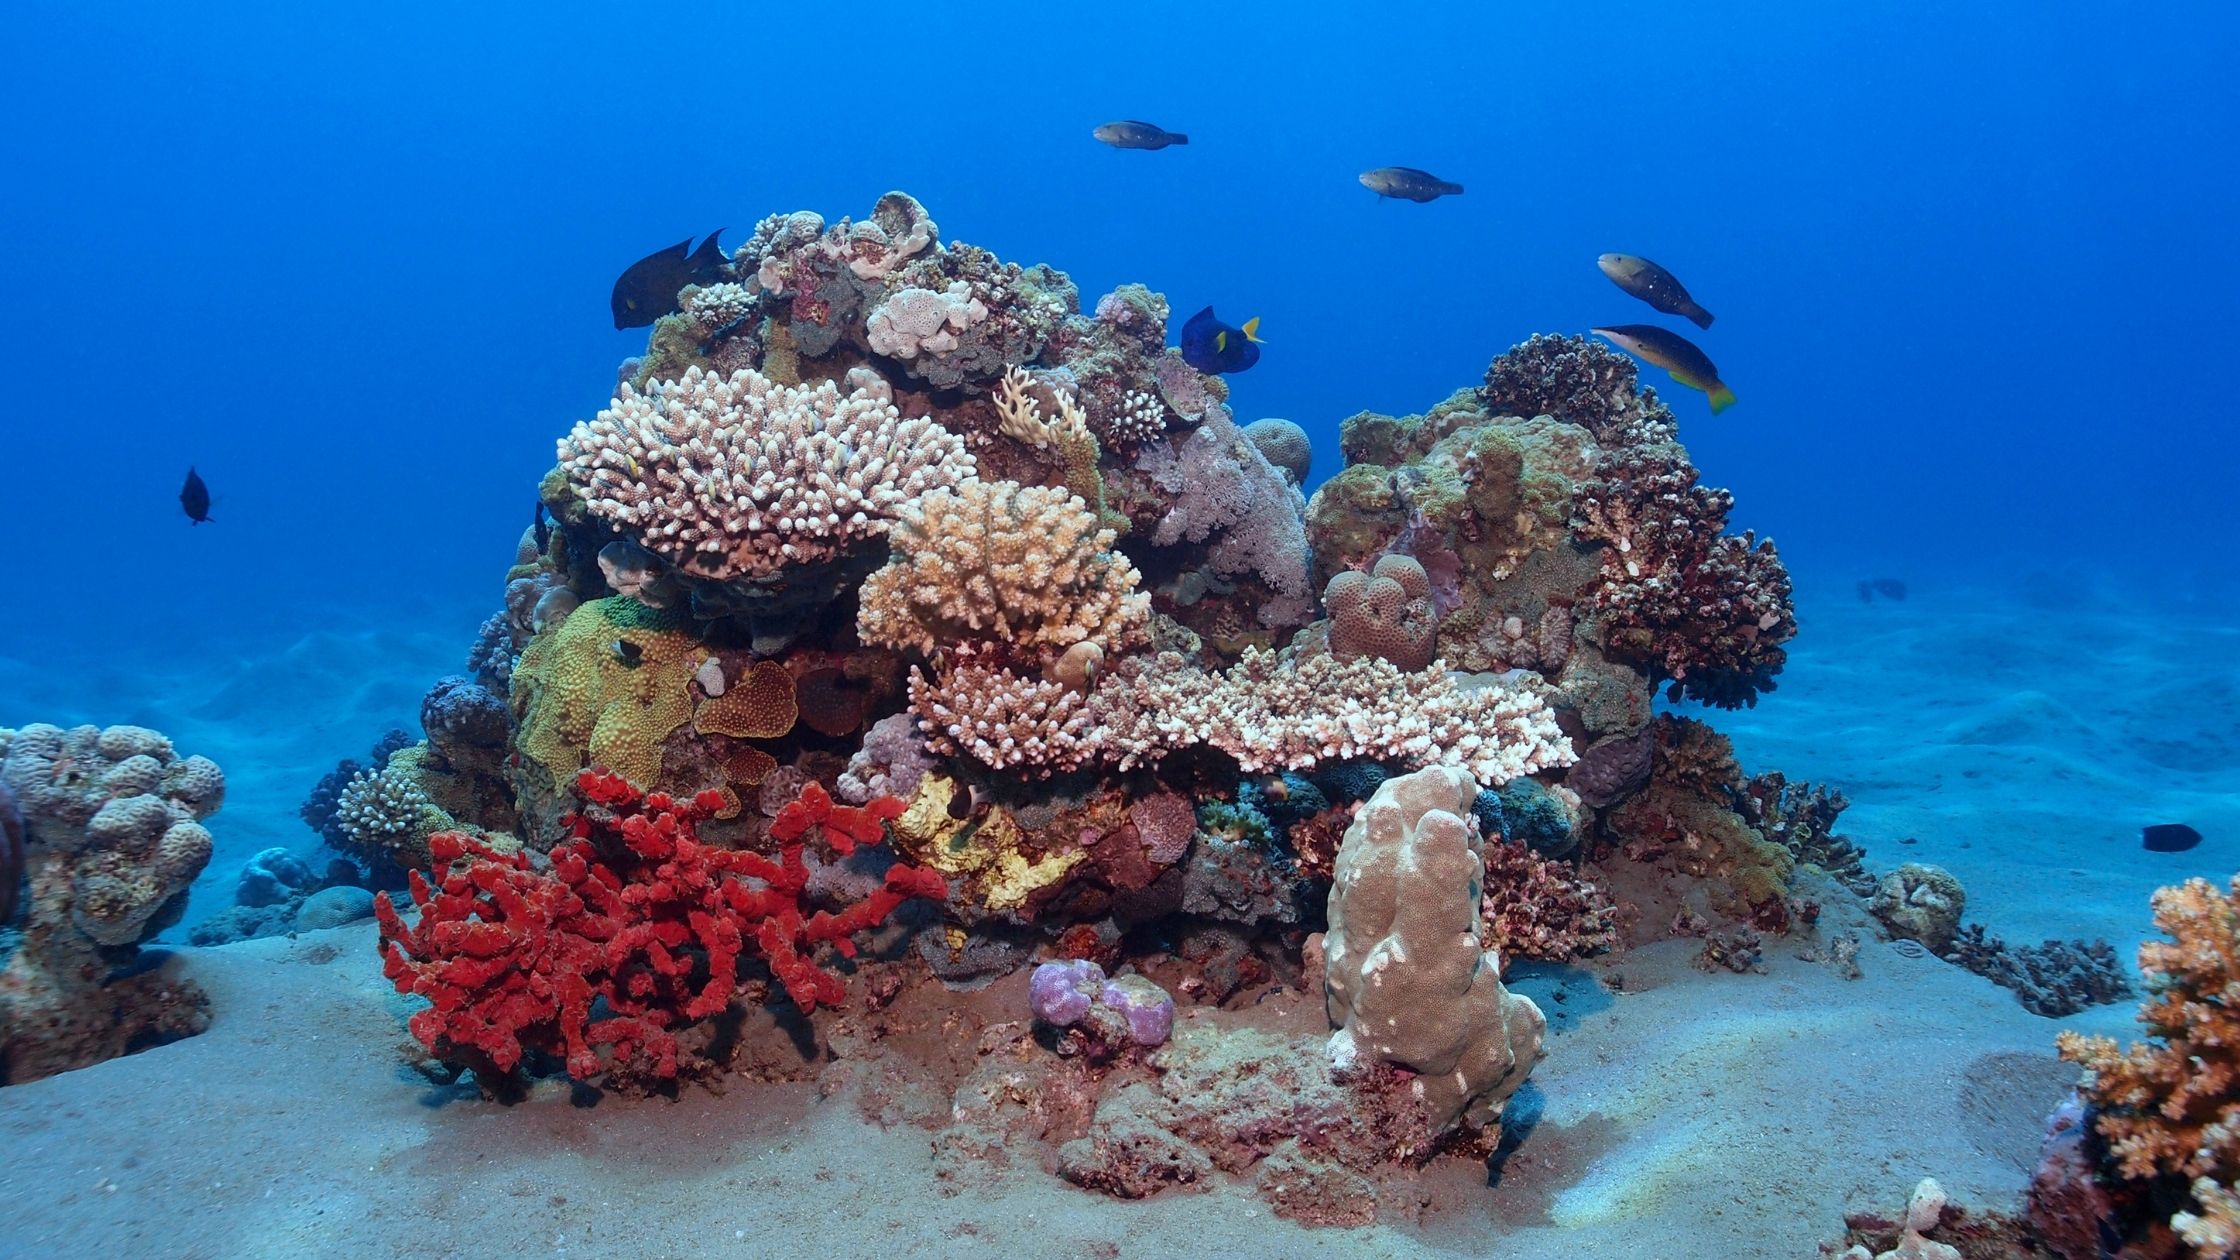 A picture of fish and coral in the red sea coral reef.